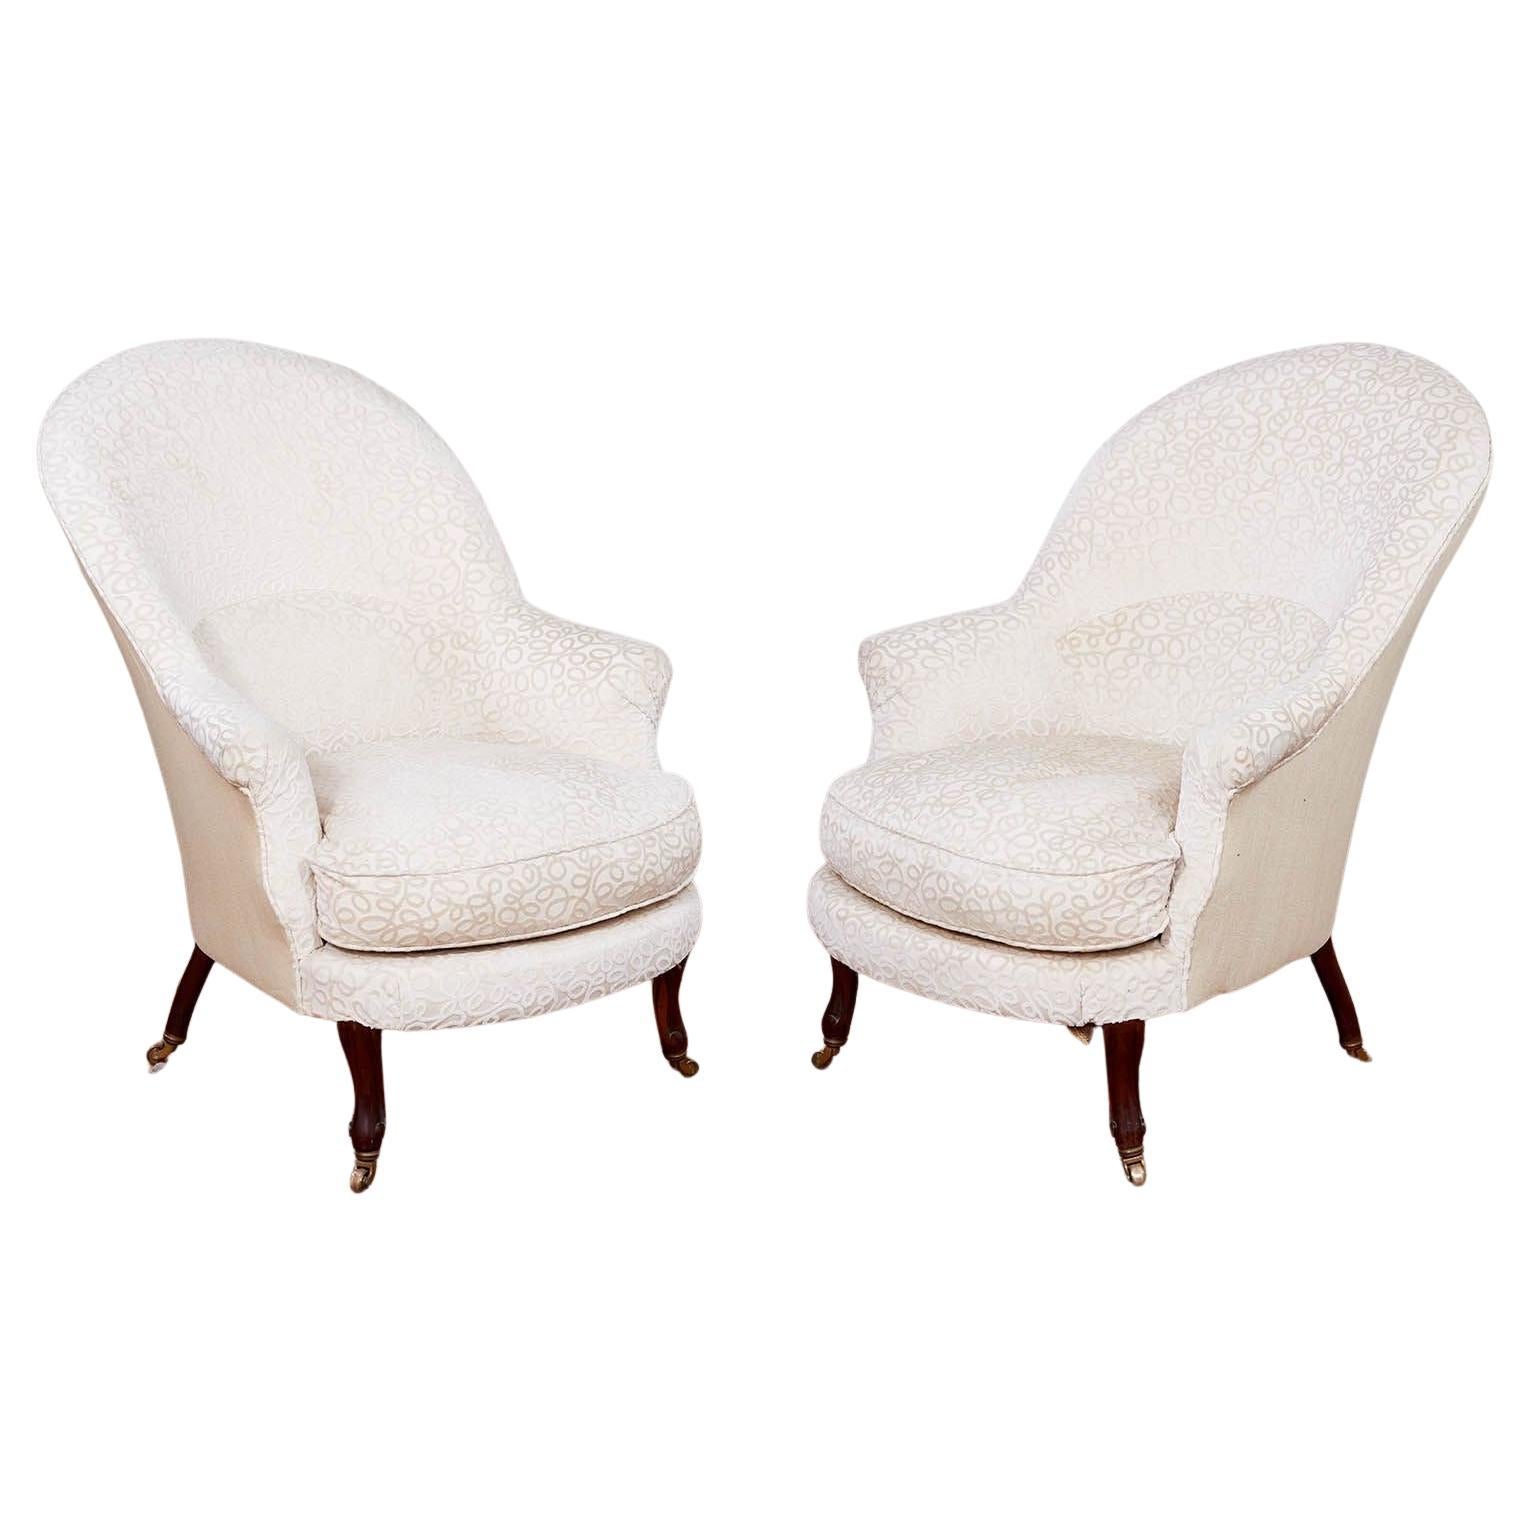 Pair of Upholstered Art Nouveau Slipper Chairs For Sale